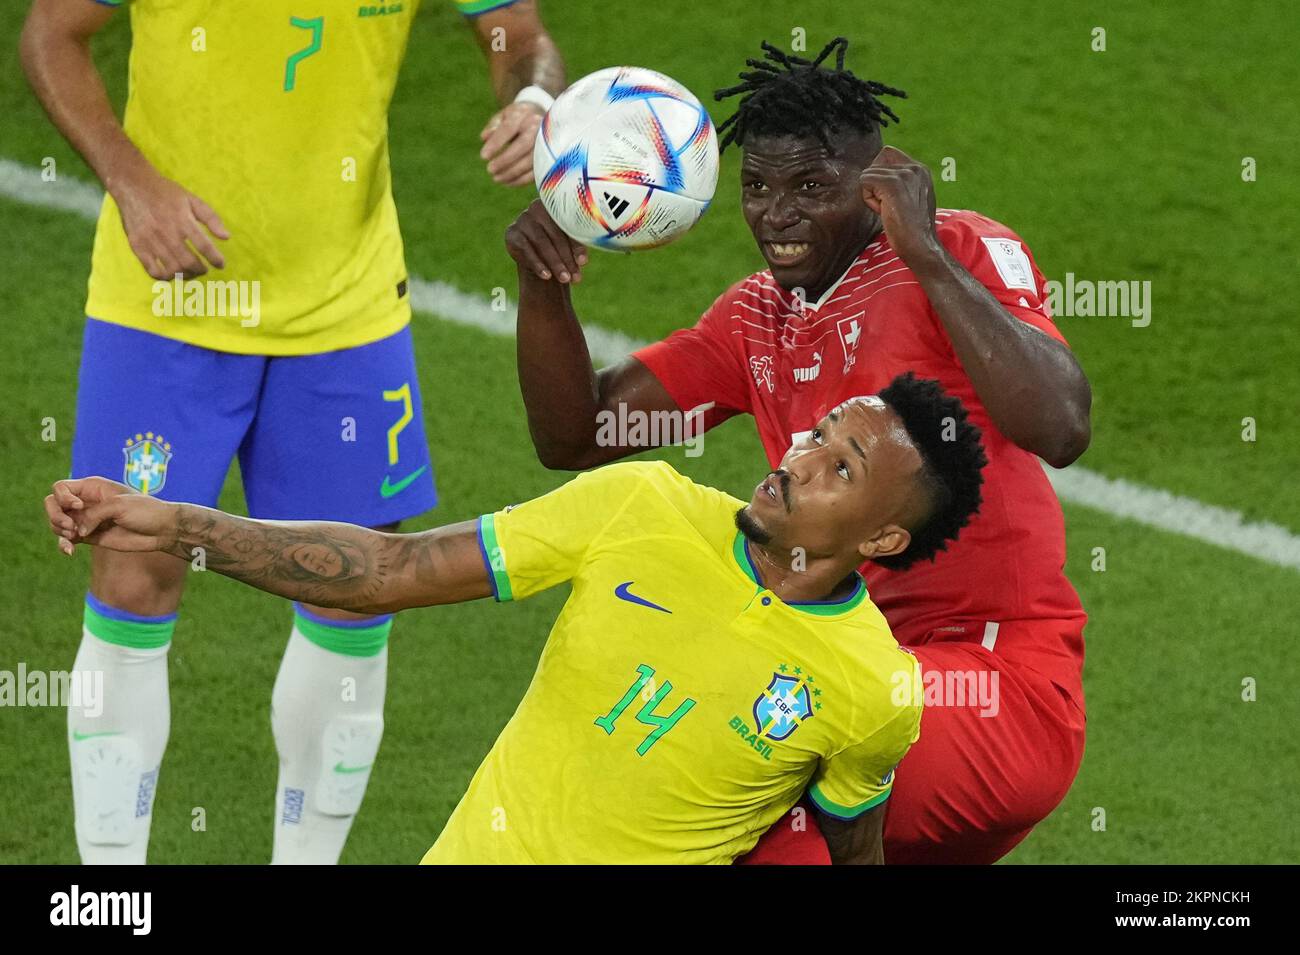 Doha, Qatar. 28th Nov, 2022. Breel Embolo (1st R) of Switzerland vies with Eder Militao of Brazil during the Group G match between Brazil and Switzerland at the 2022 FIFA World Cup at Ras Abu Aboud (974) Stadium in Doha, Qatar, Nov. 28, 2022. Credit: Zheng Huansong/Xinhua/Alamy Live News Stock Photo